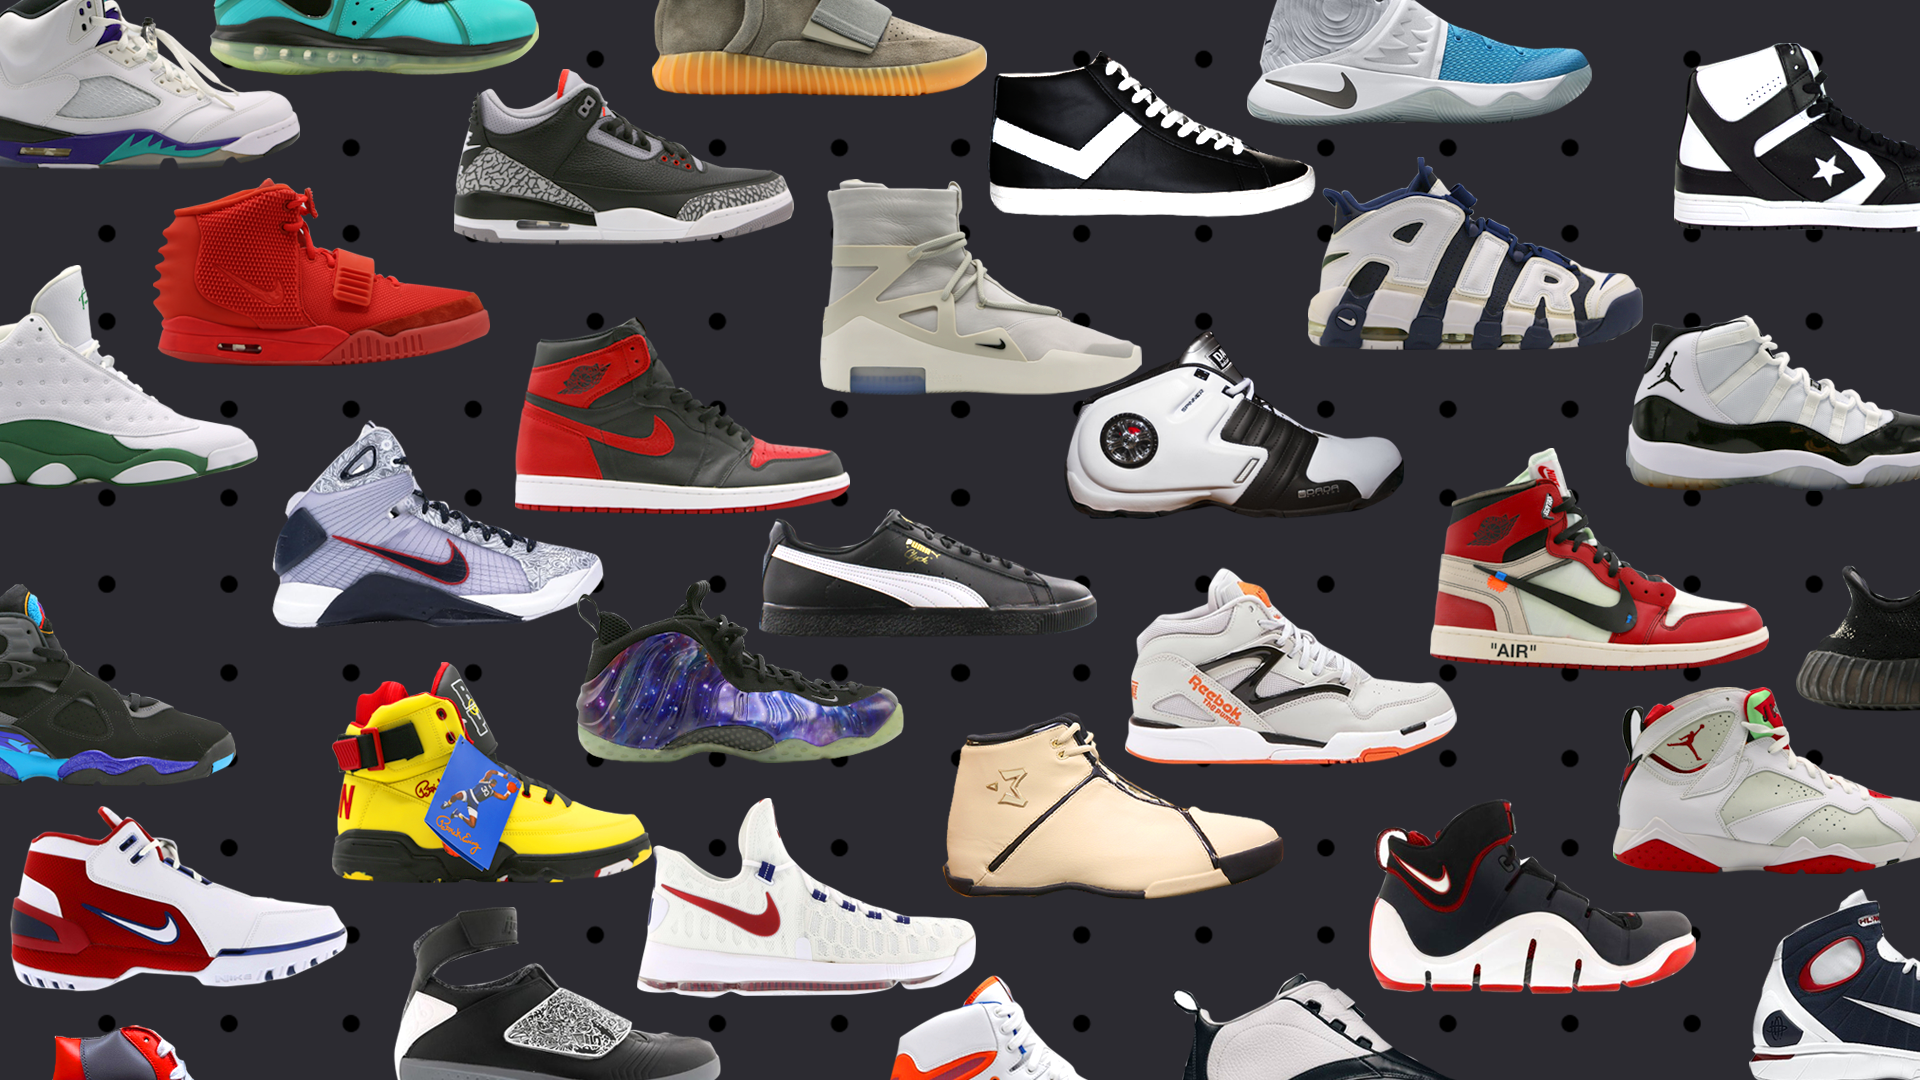 Free download The Sneaker Madness Winner Is MSGNetworkscom [1920x1080 ...